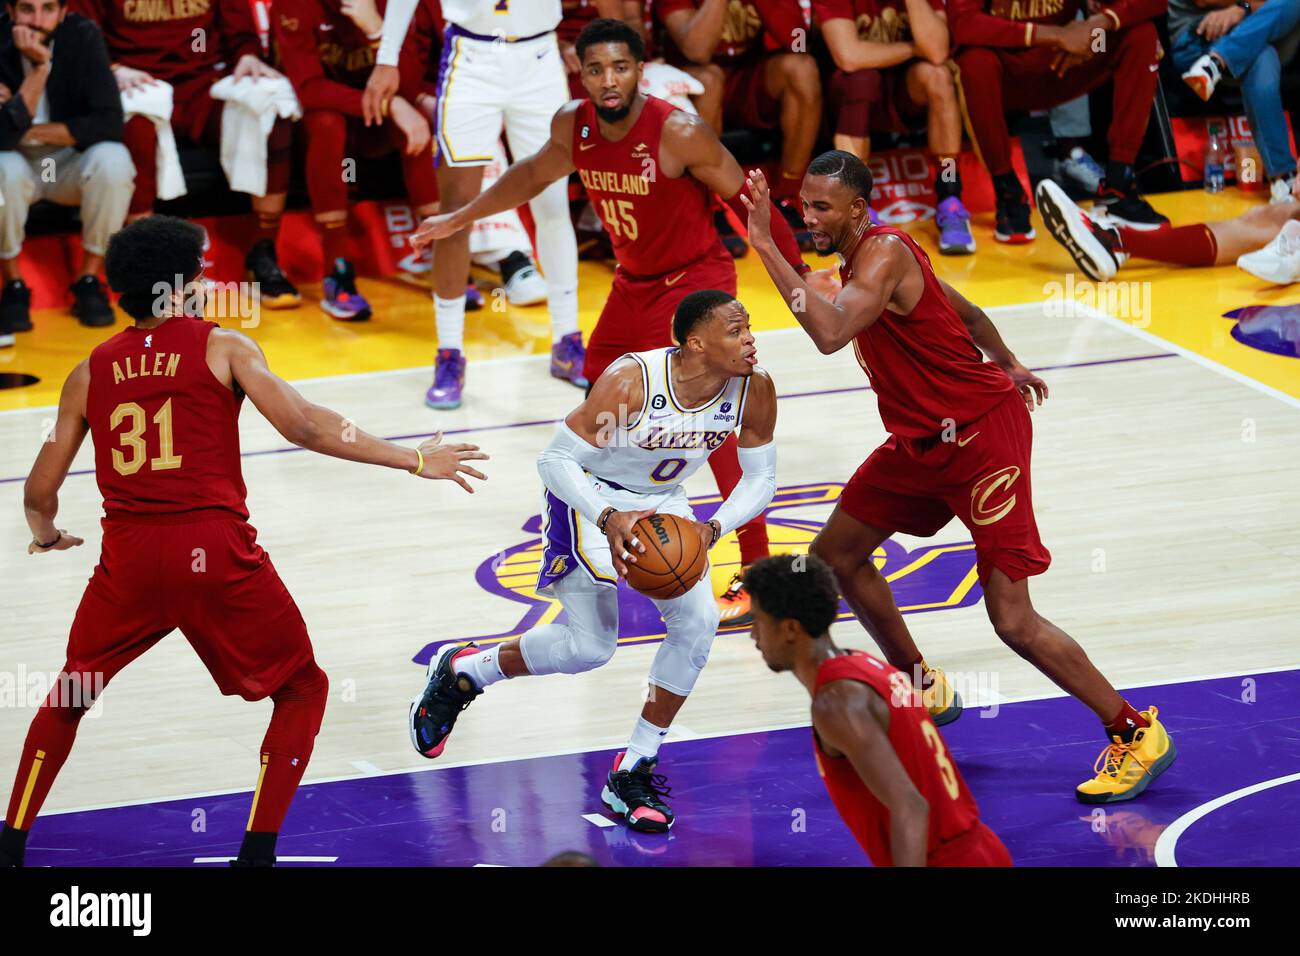 Los Angeles, California, USA. 6th Nov, 2022. Los Angeles Lakers guard Russell Westbrook (0) drives against the Cleveland Cavaliers during an NBA basketball game, Sunday, Nov